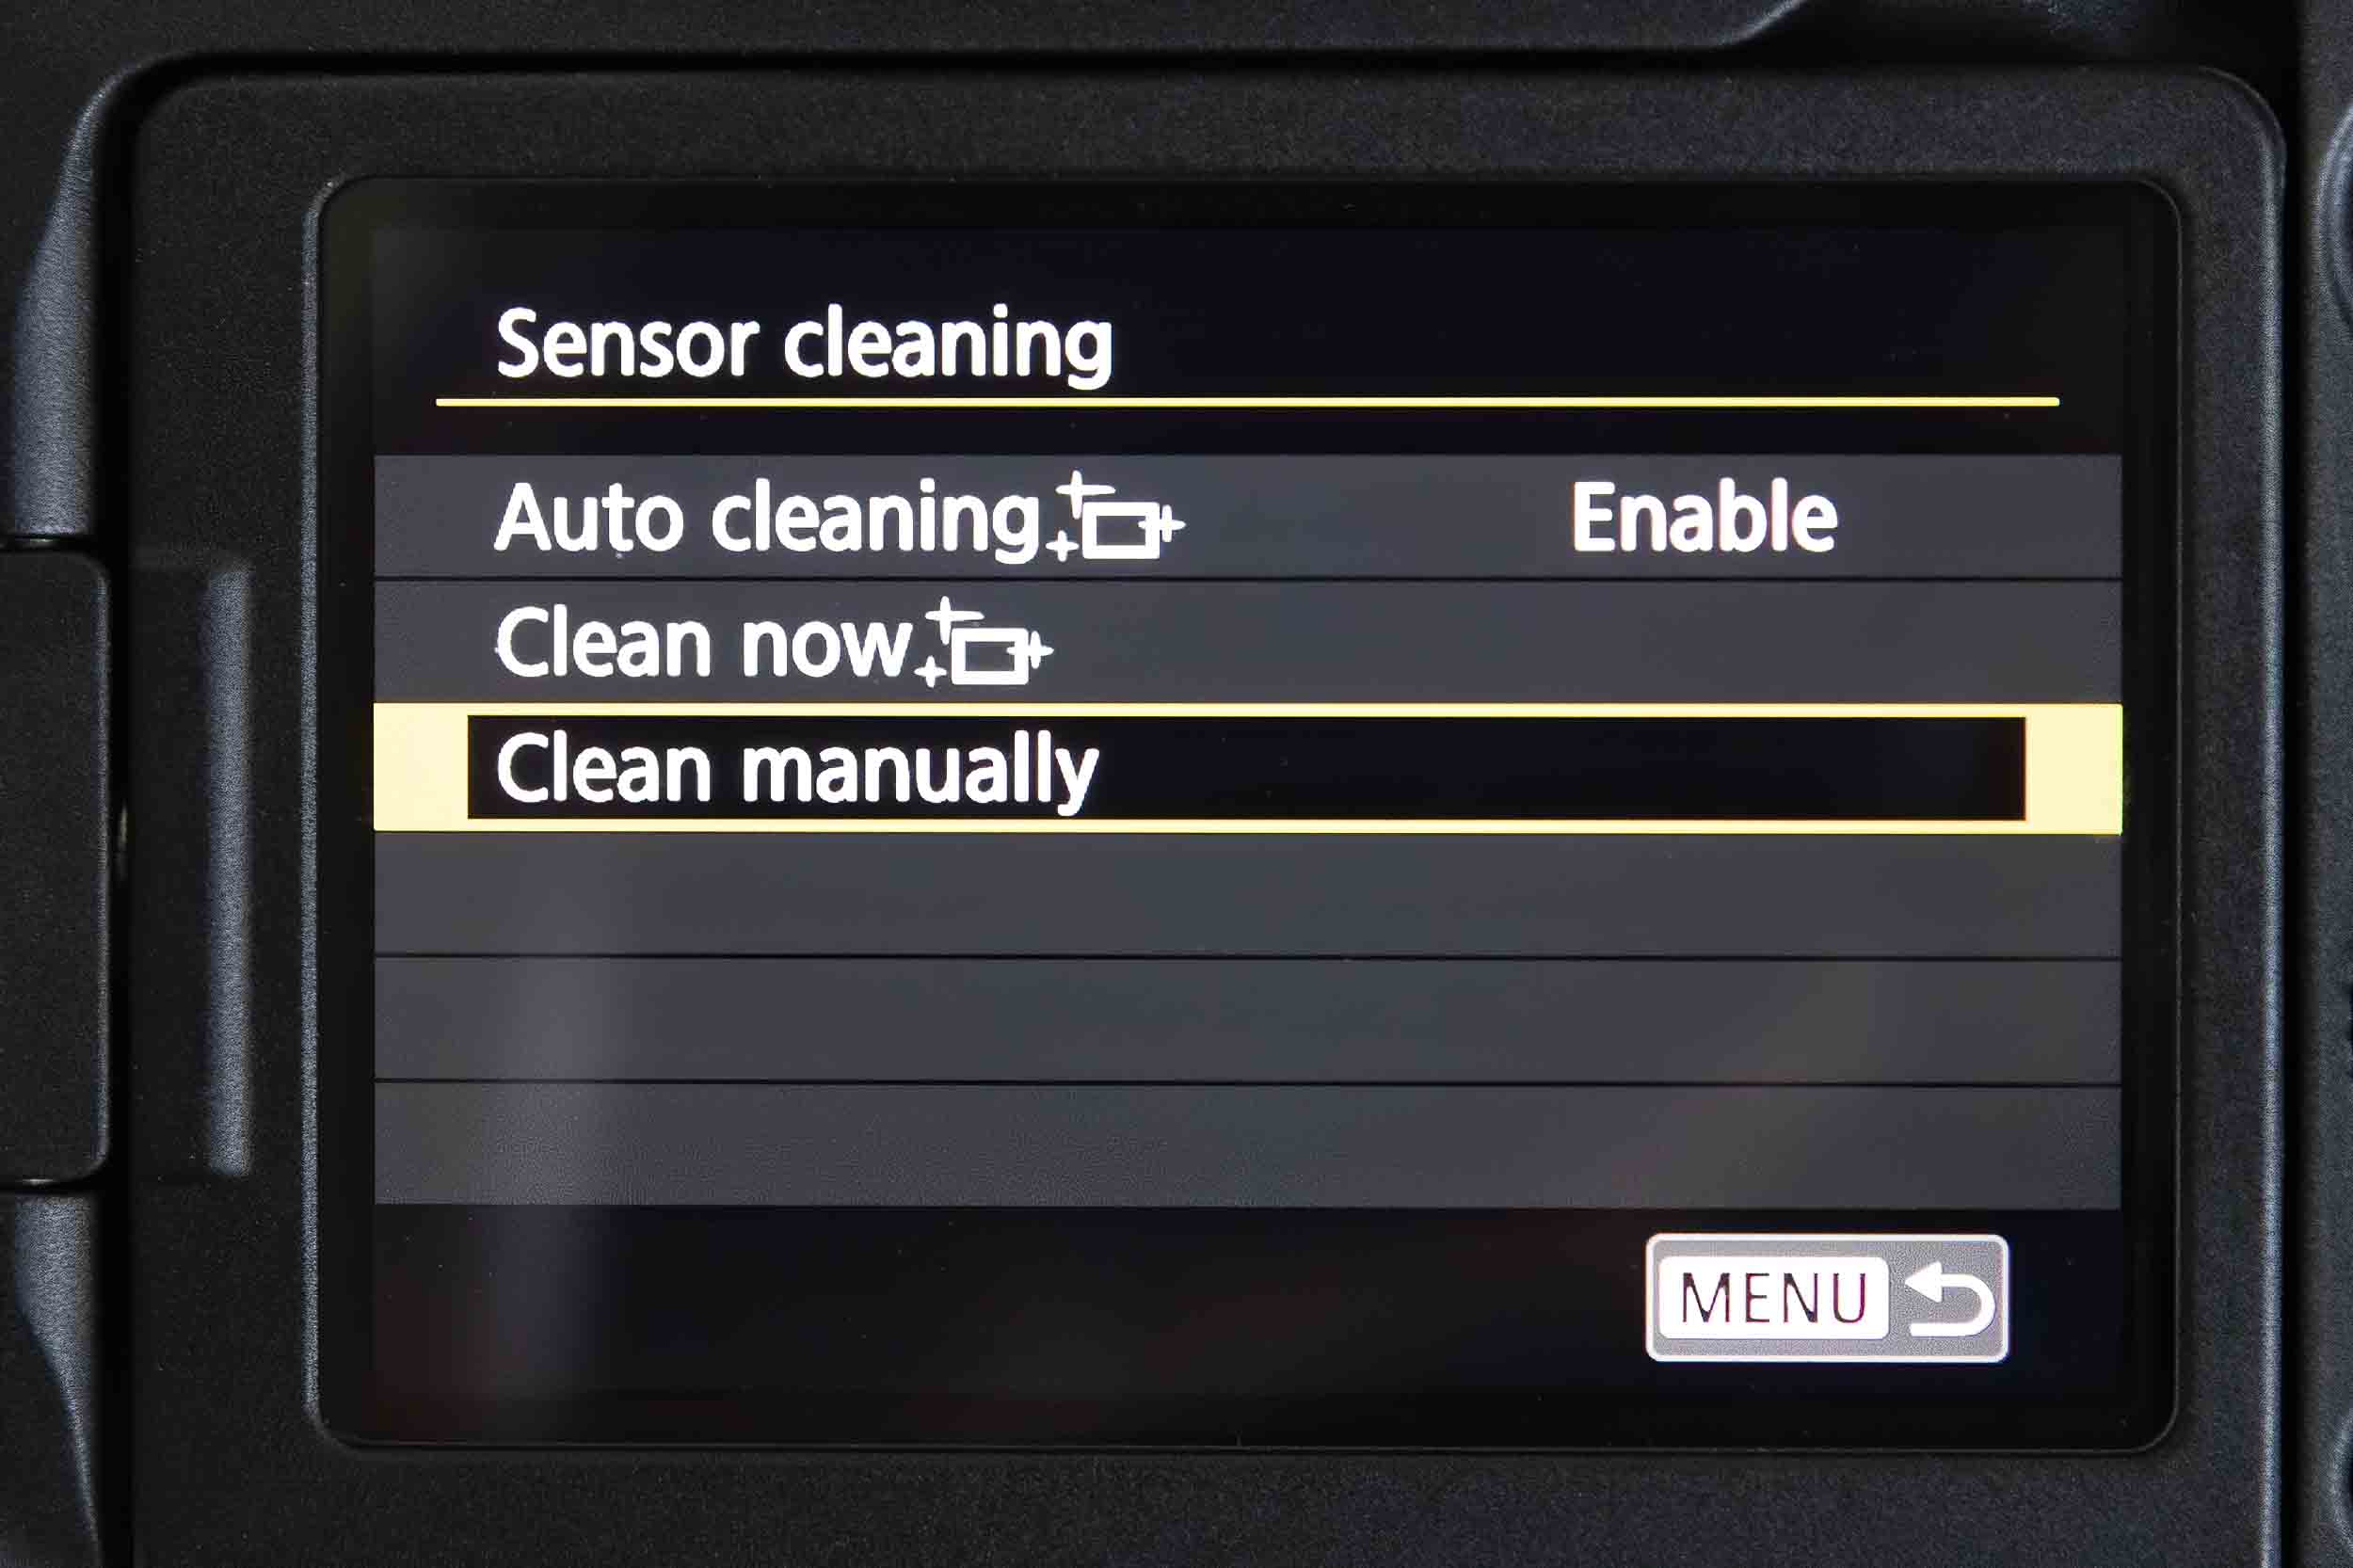 Activating manual cleaning on a DSLR